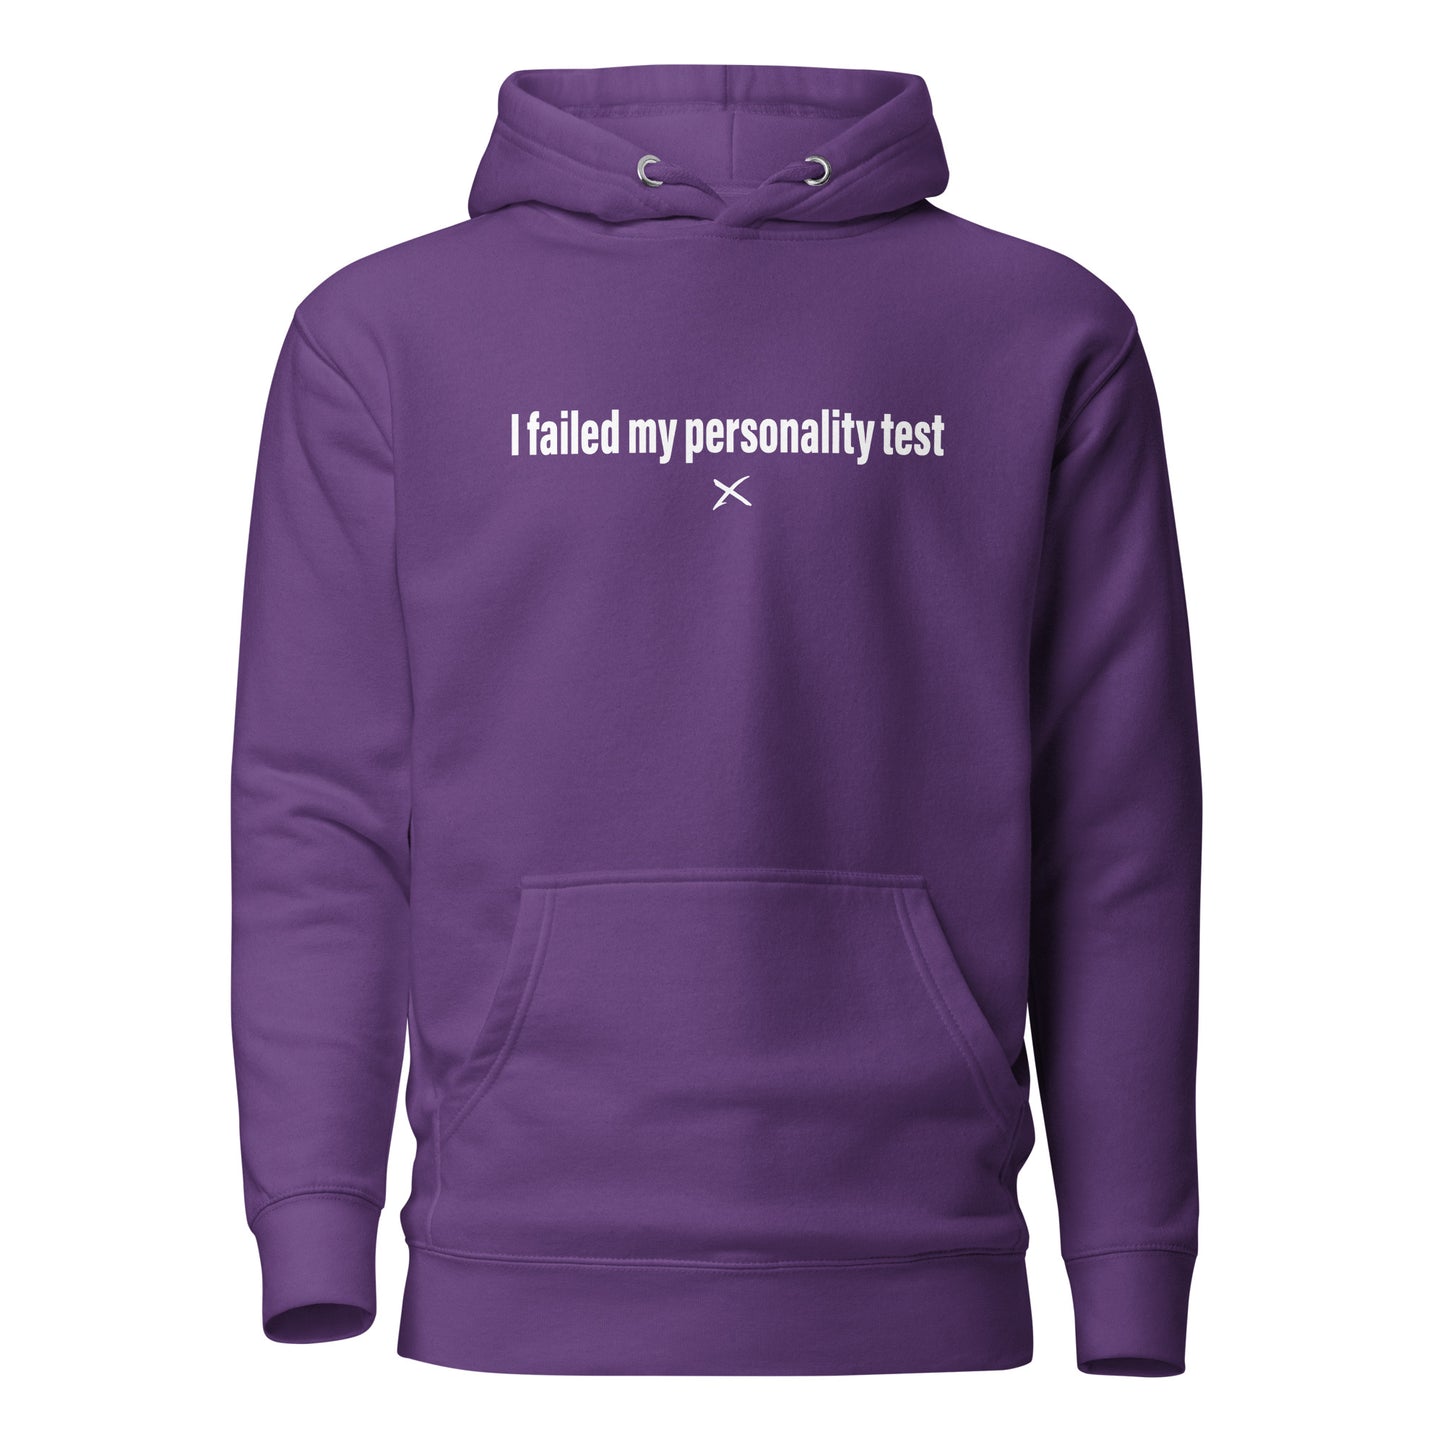 I failed my personality test - Hoodie